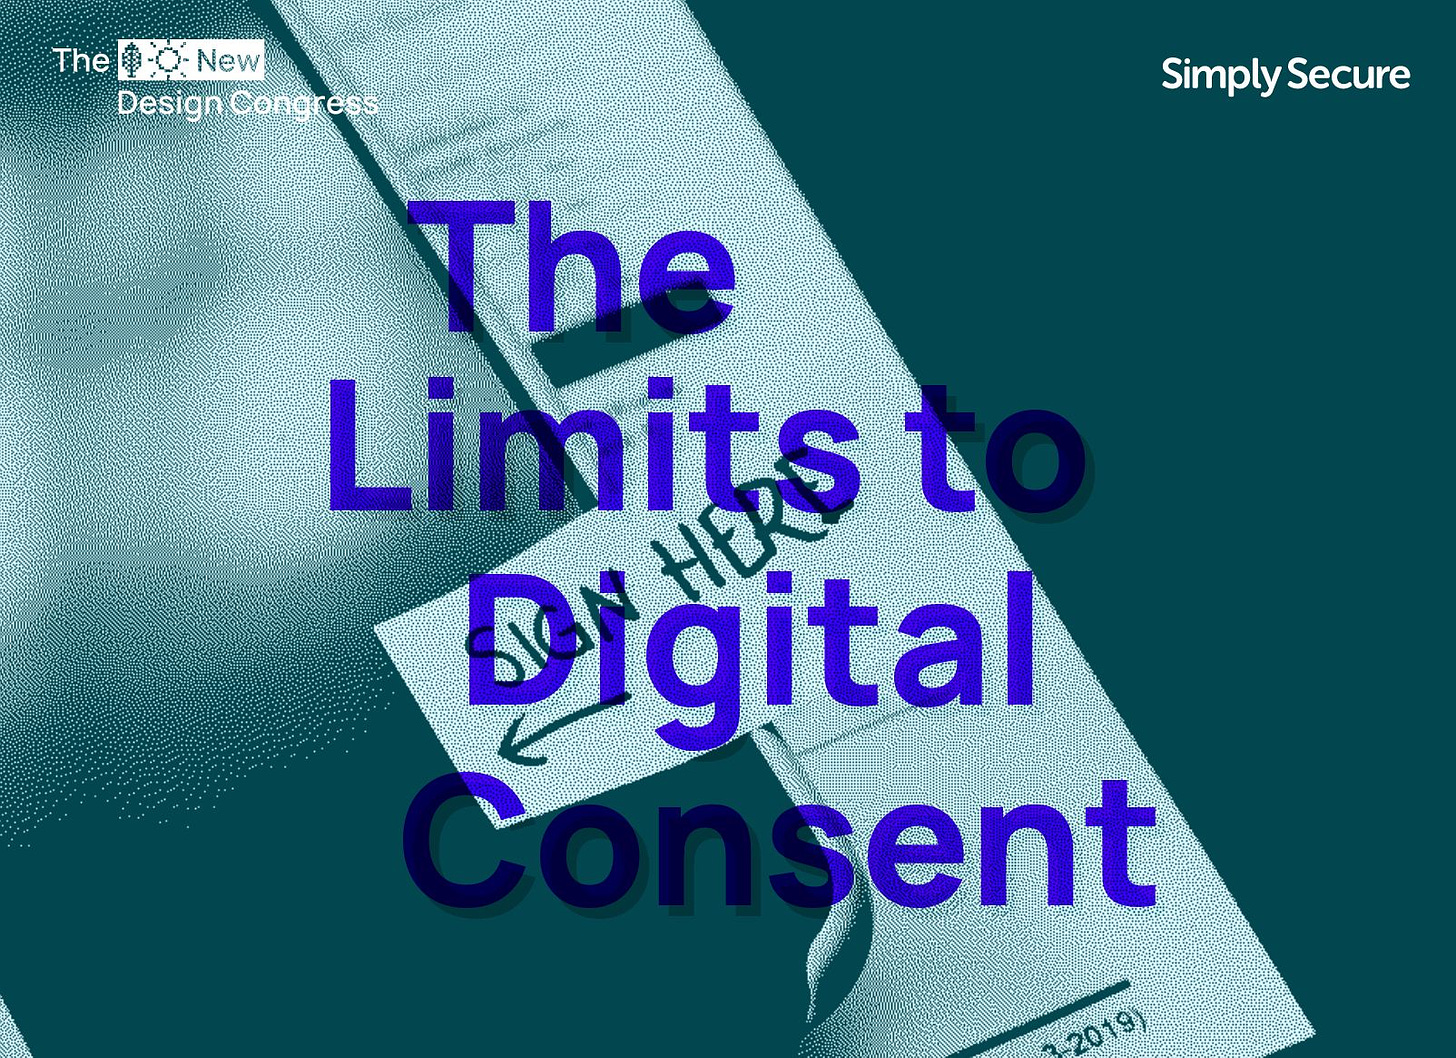 A distorted image of a mobile phone with a "Sign here" post-it note attached to its screen. The New Design Congress and Simply Secure logos placed either side of the title overlay, "The Limits to Digital Consent."